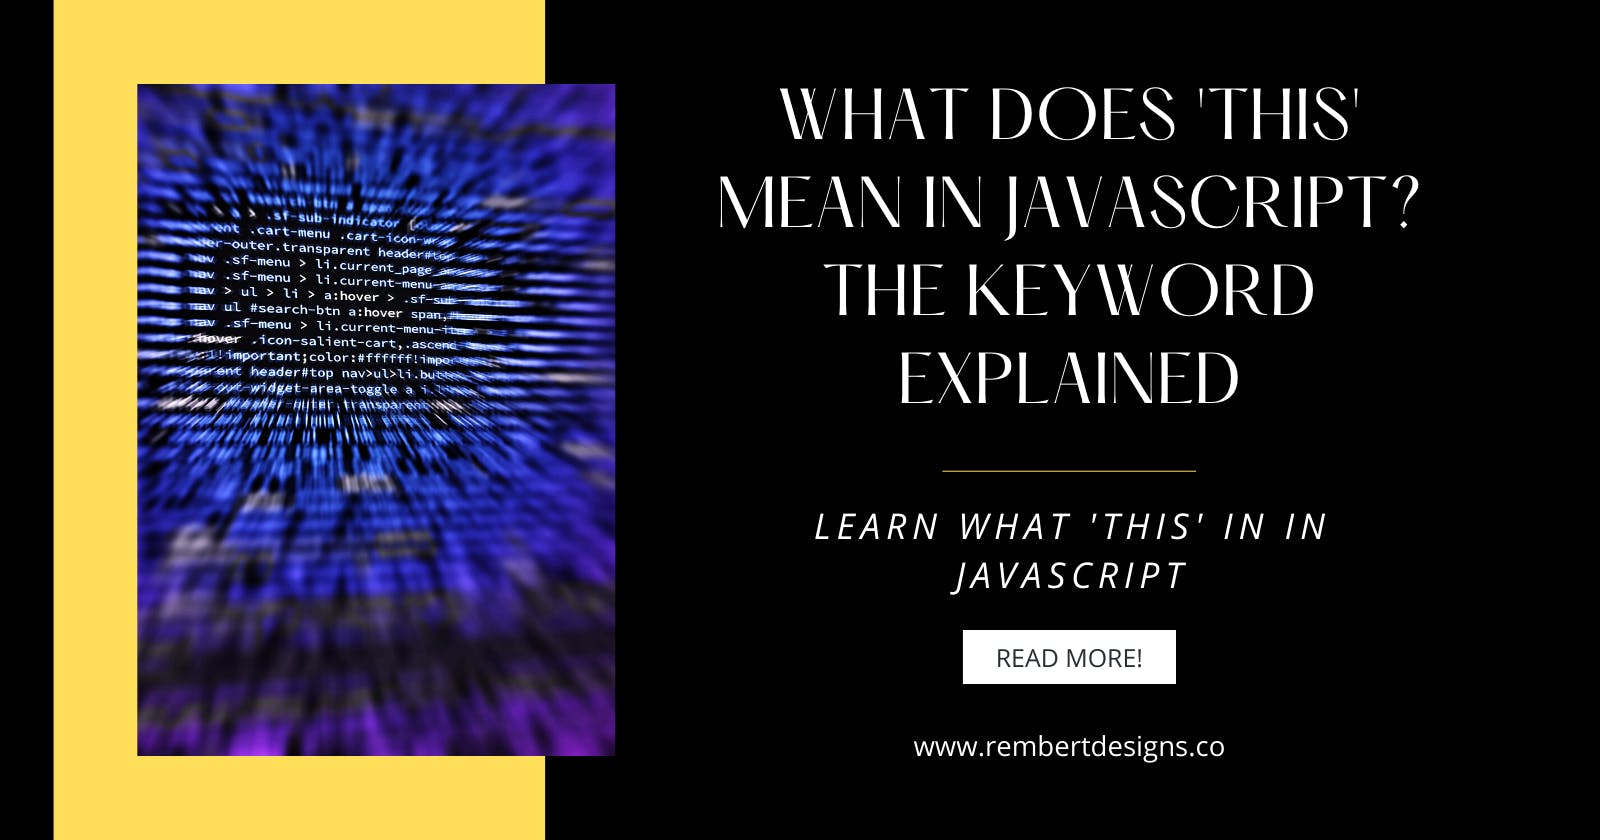 What Does 'This' Mean in JavaScript? The Keyword Explained